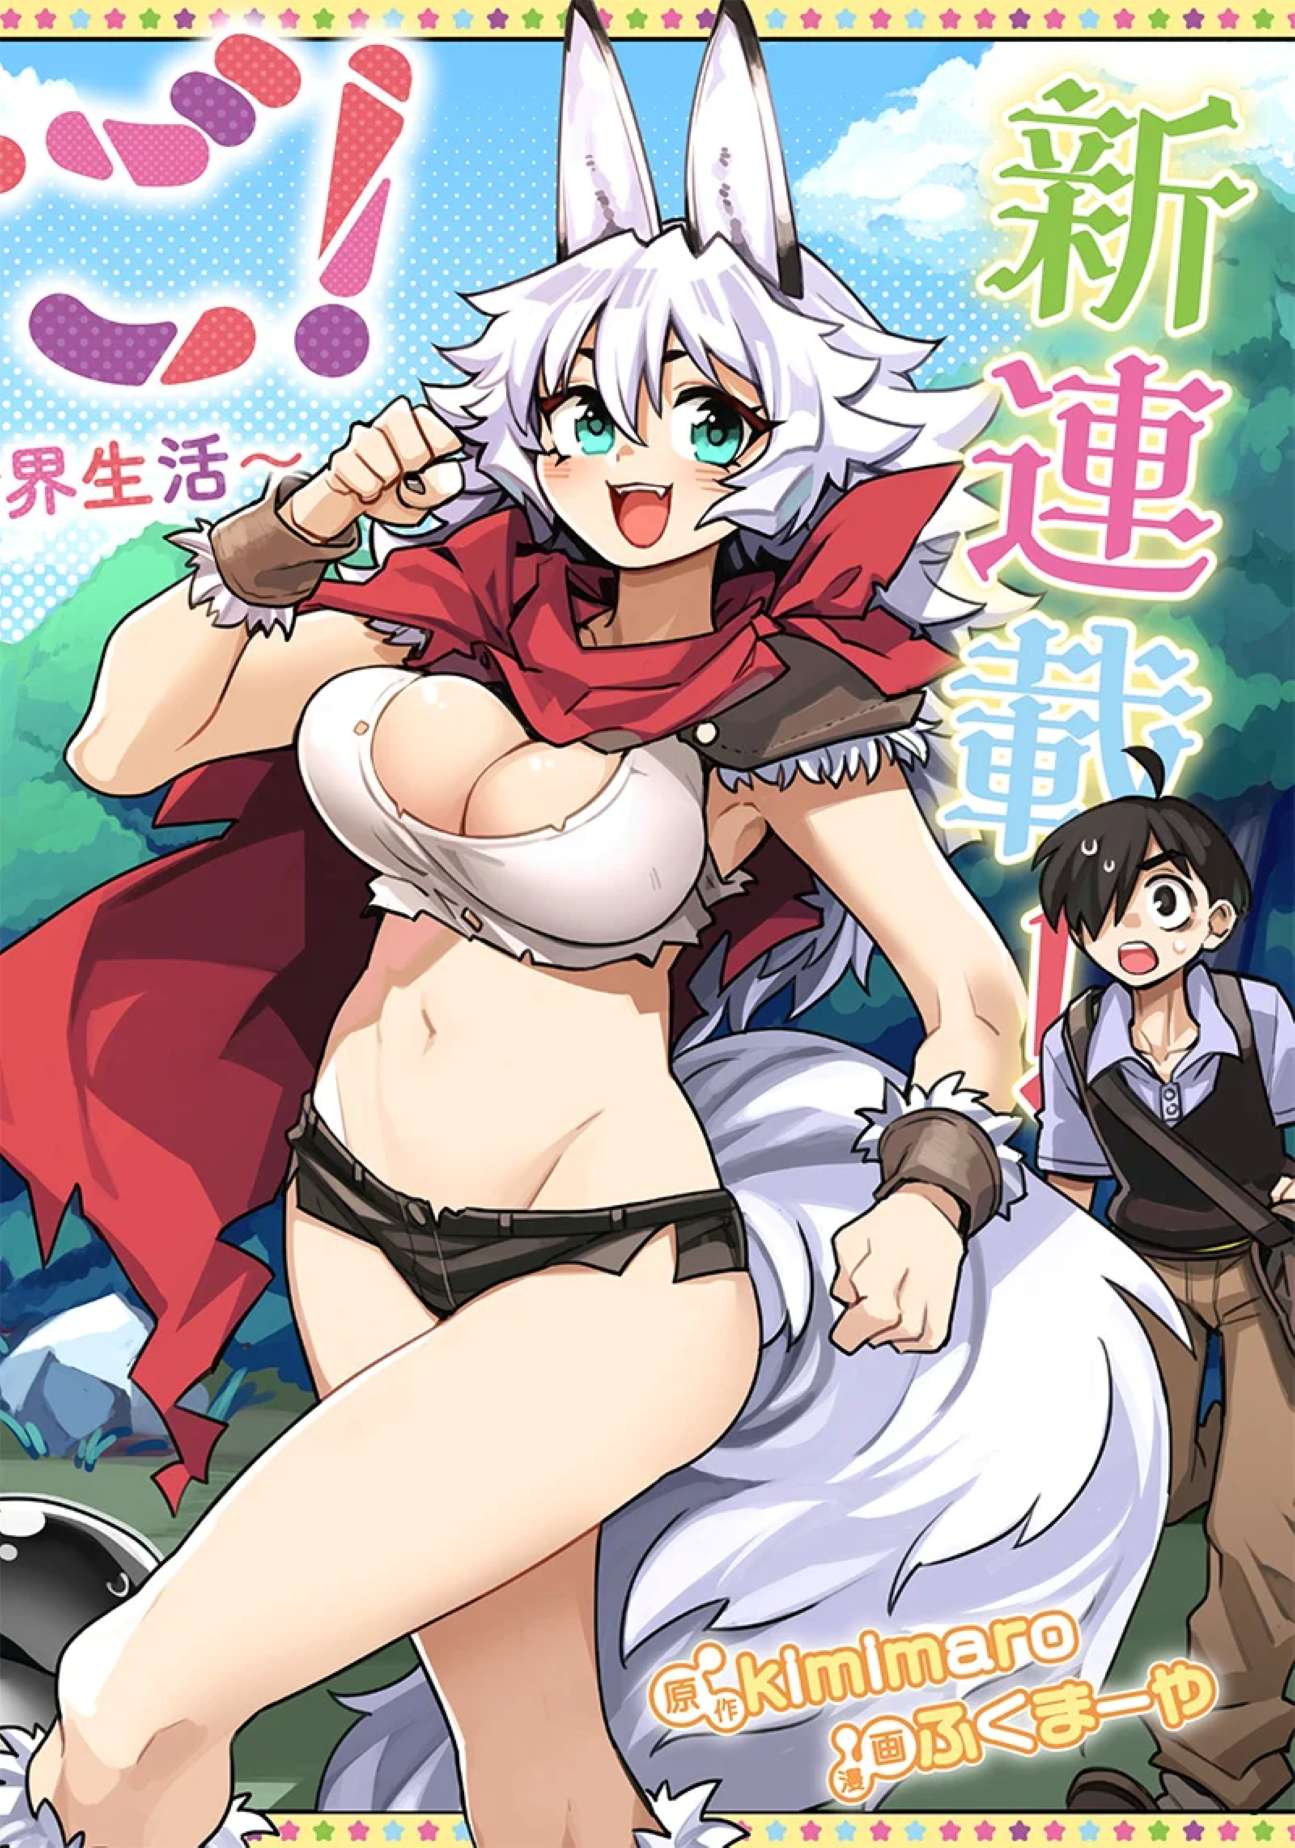 Monmusugo! 〜Living In Another World With The Strongest Monster Girls With Translation Skills〜 - chapter 5.2 - #2